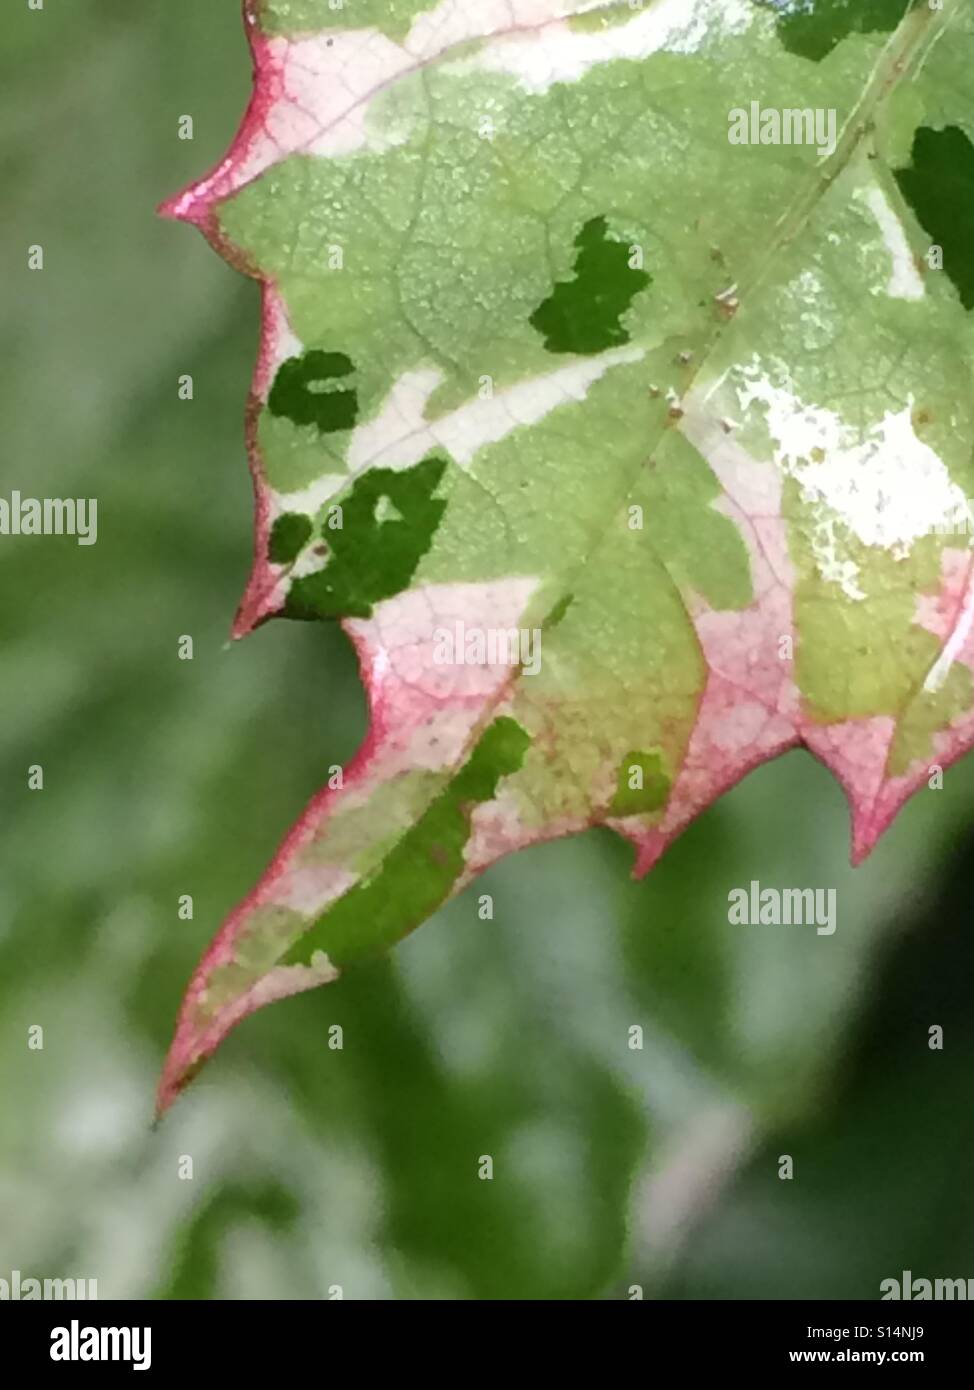 Variegated leaf with dark pink jagged edges. Stock Photo